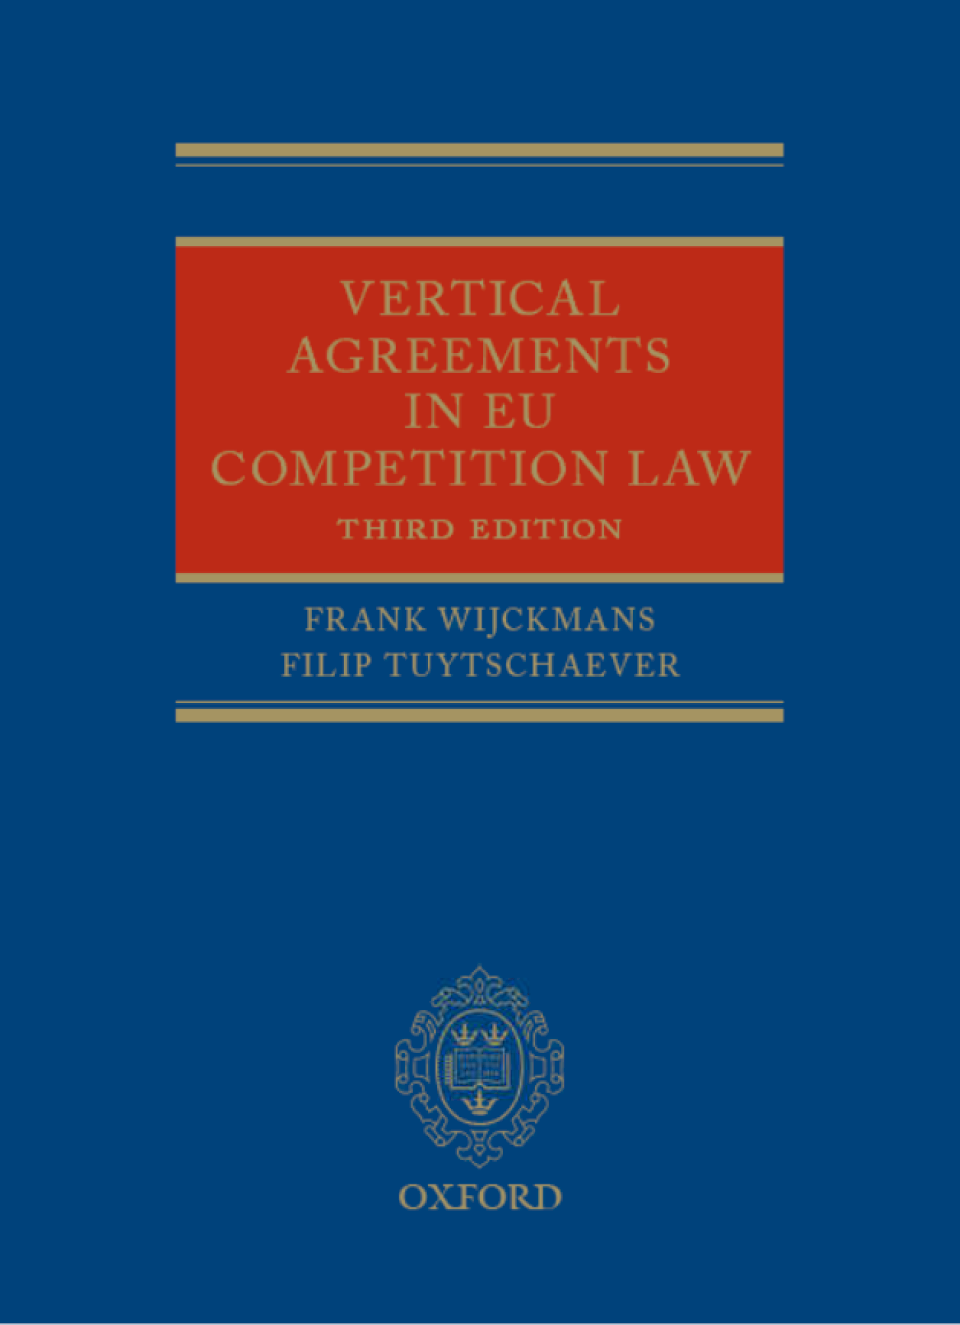 Vertical Agreements in EU Competition Law (3rd edition)